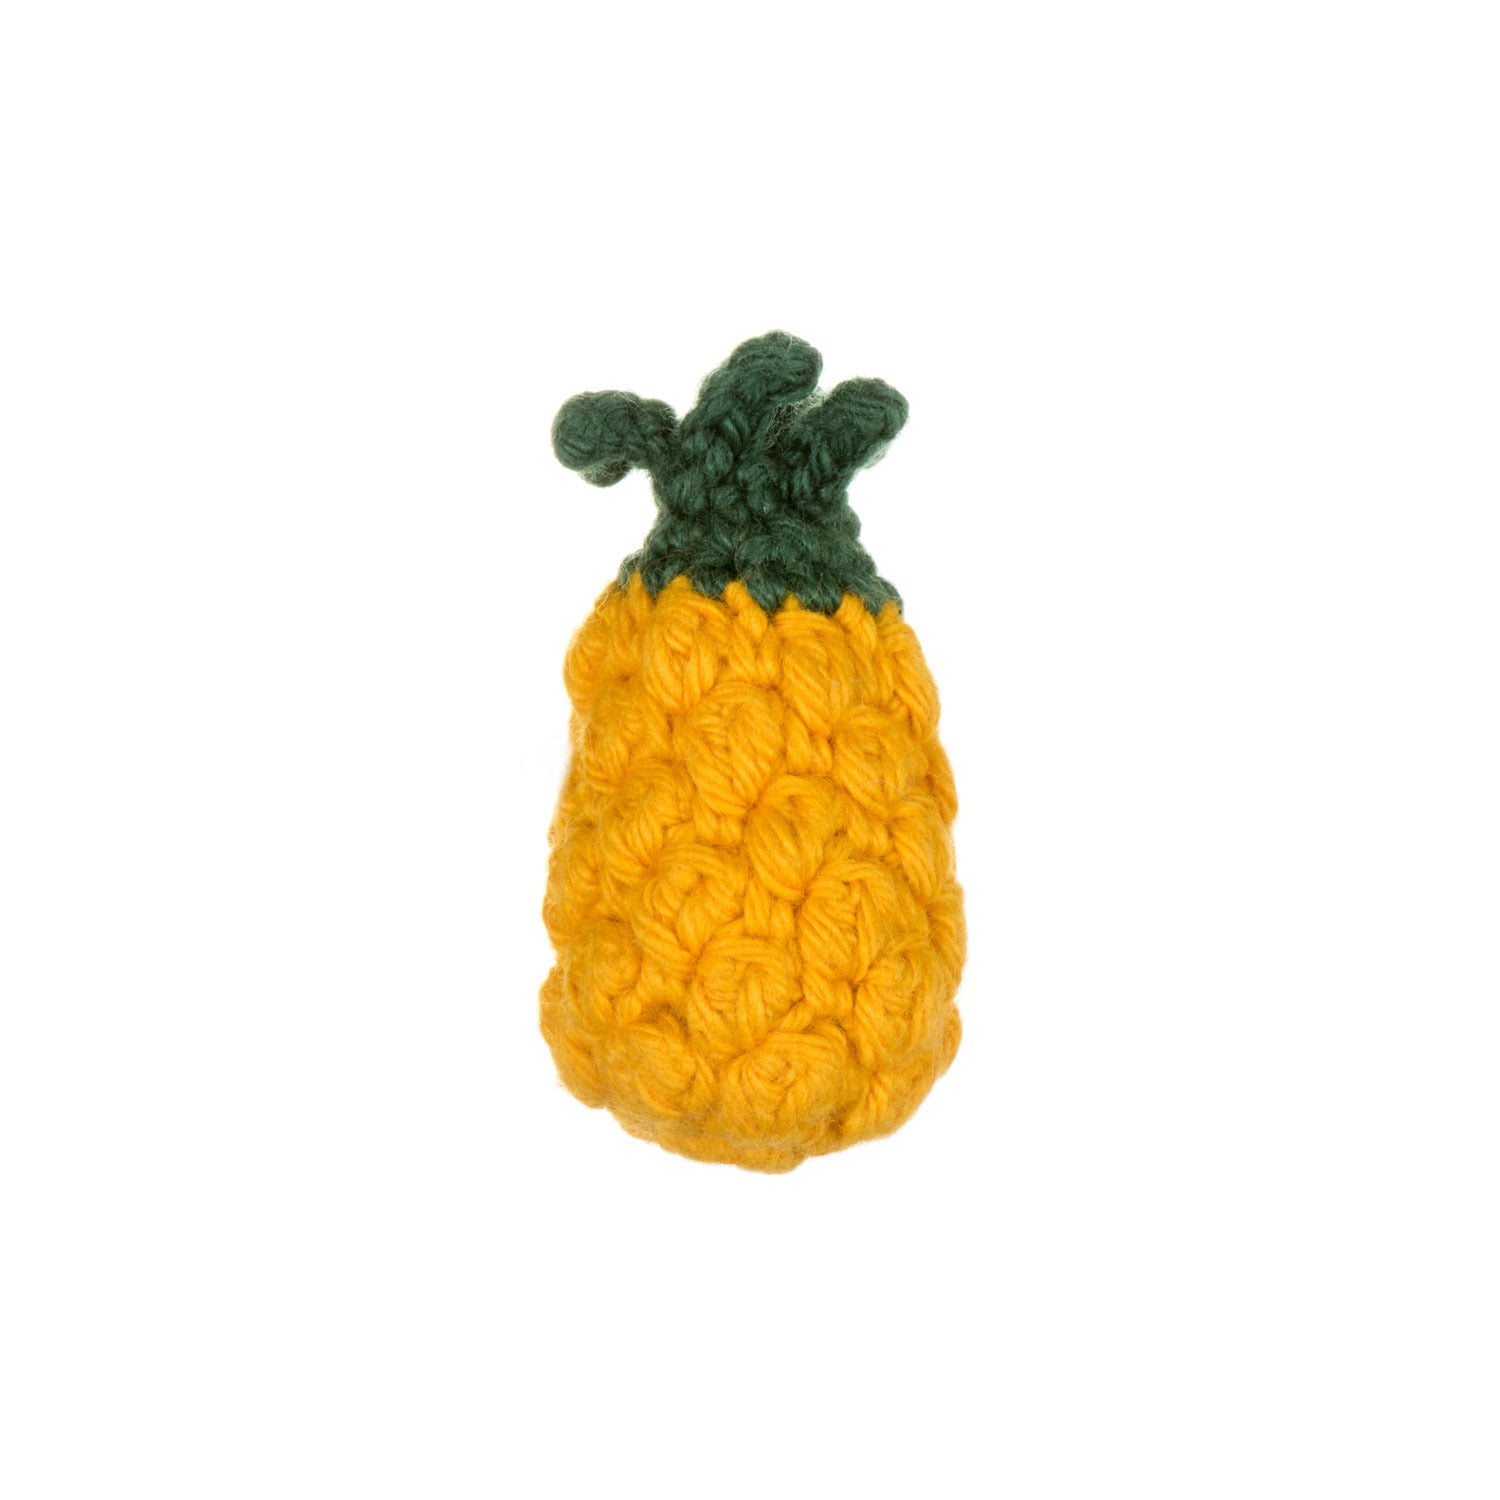 Just Trade Mini Pineapple Brooch,little-tiger-togs.